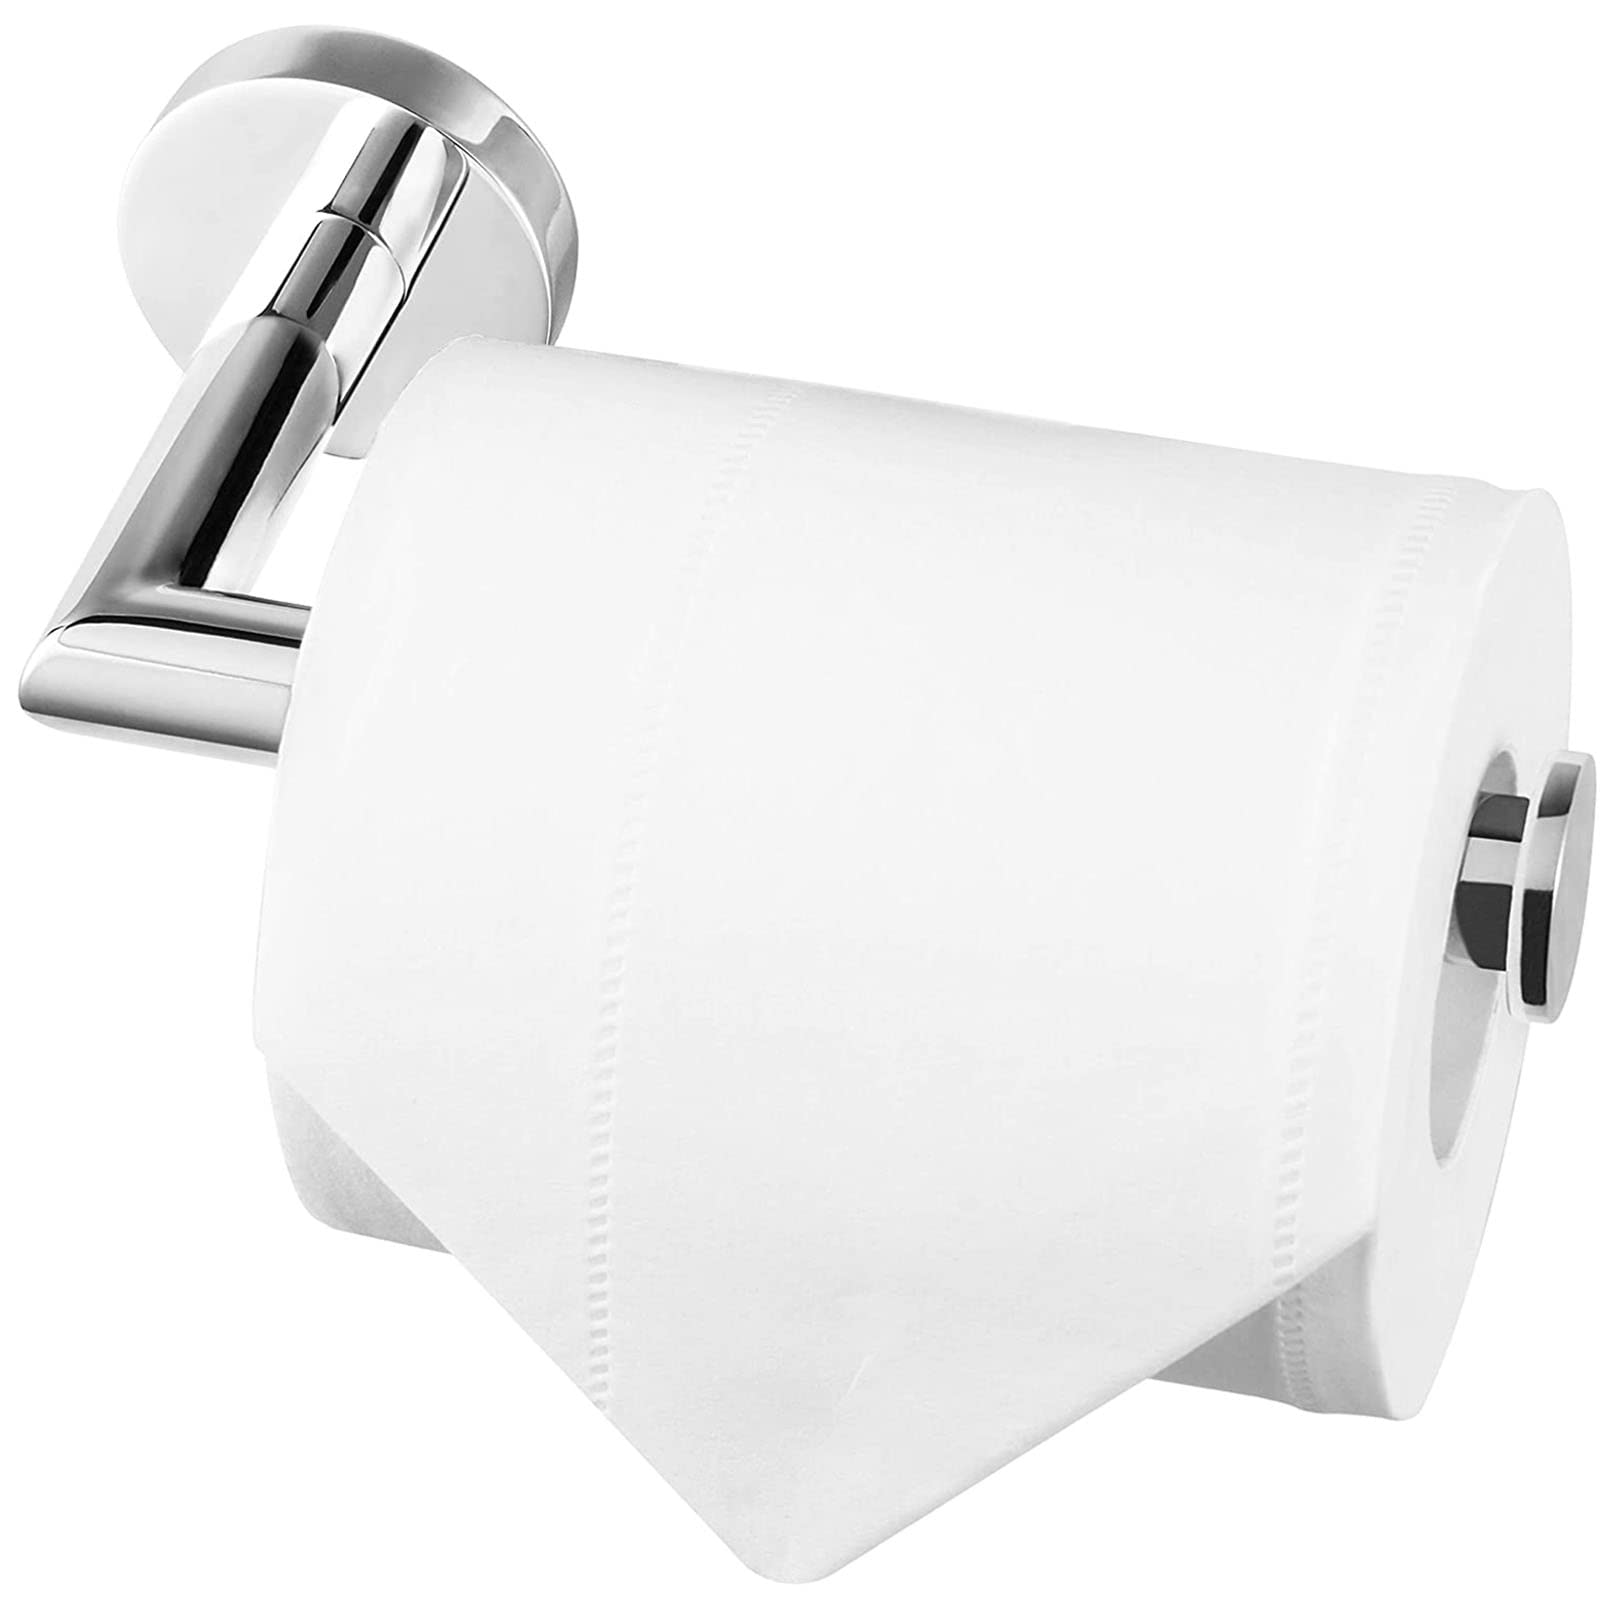 toilet-paper-holder-wall-mount-stainless-steel-round-toilet-paper-roll-holder-bathroom-polished-chrome